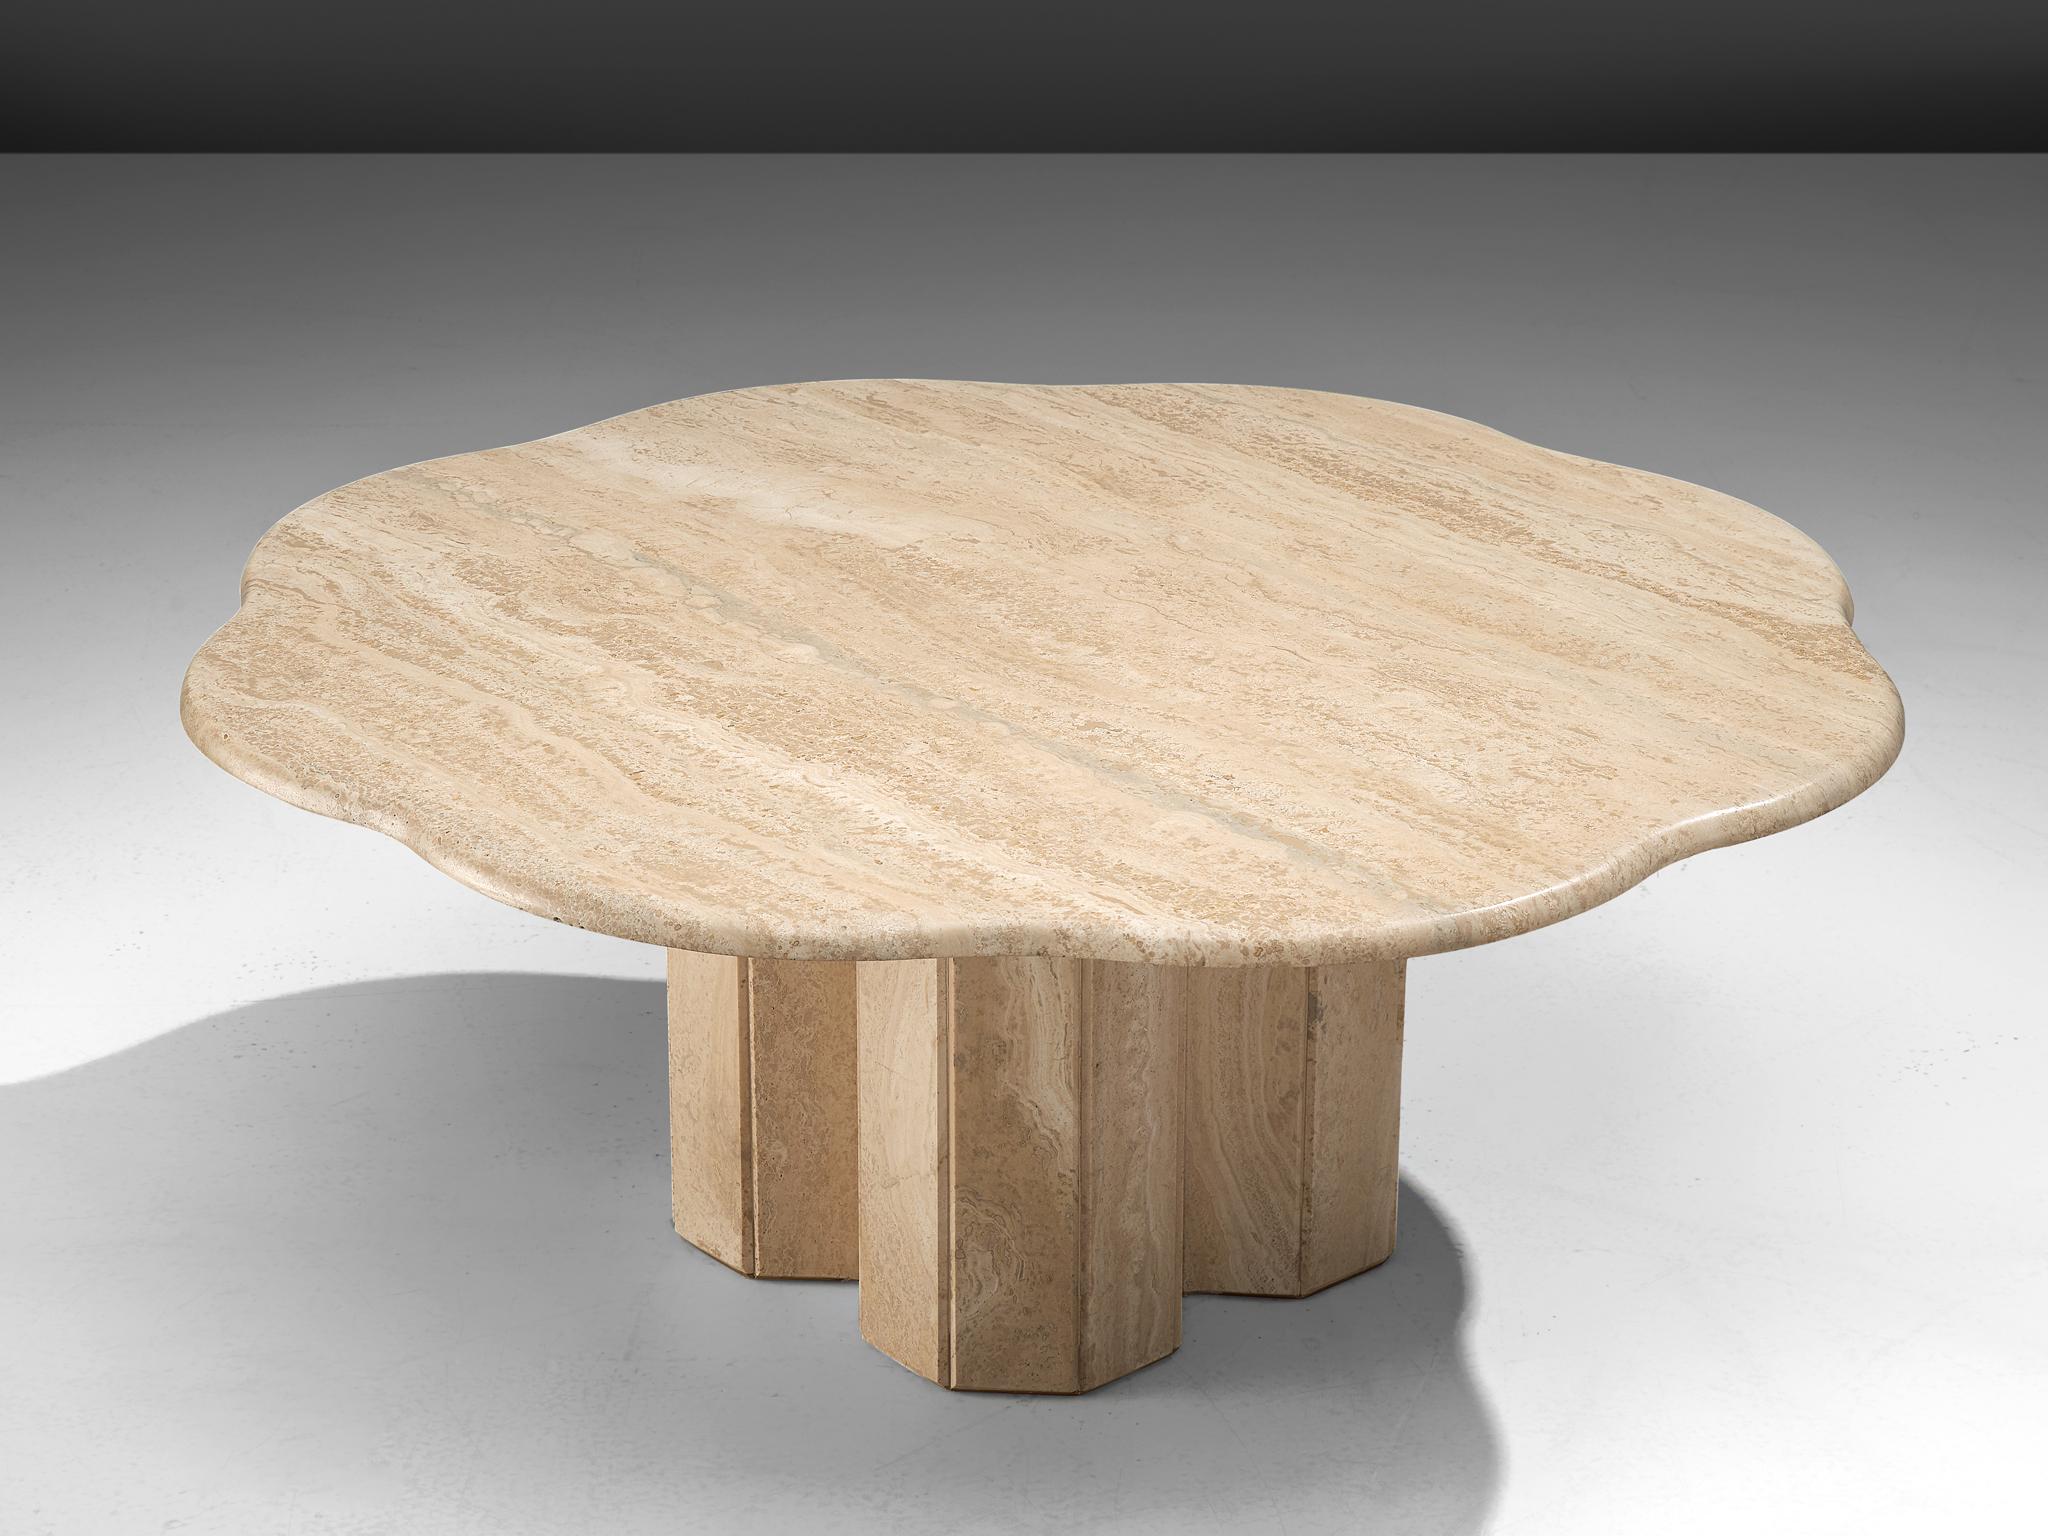 Coffee table, travertine, Europe, 1970s. 

Stunning coffee table with a biomorphic, flower inspired shaped table top. The clover-shaped base is made of travertine as well, but is build up of strokes. This is a nice, subtle contrast between the